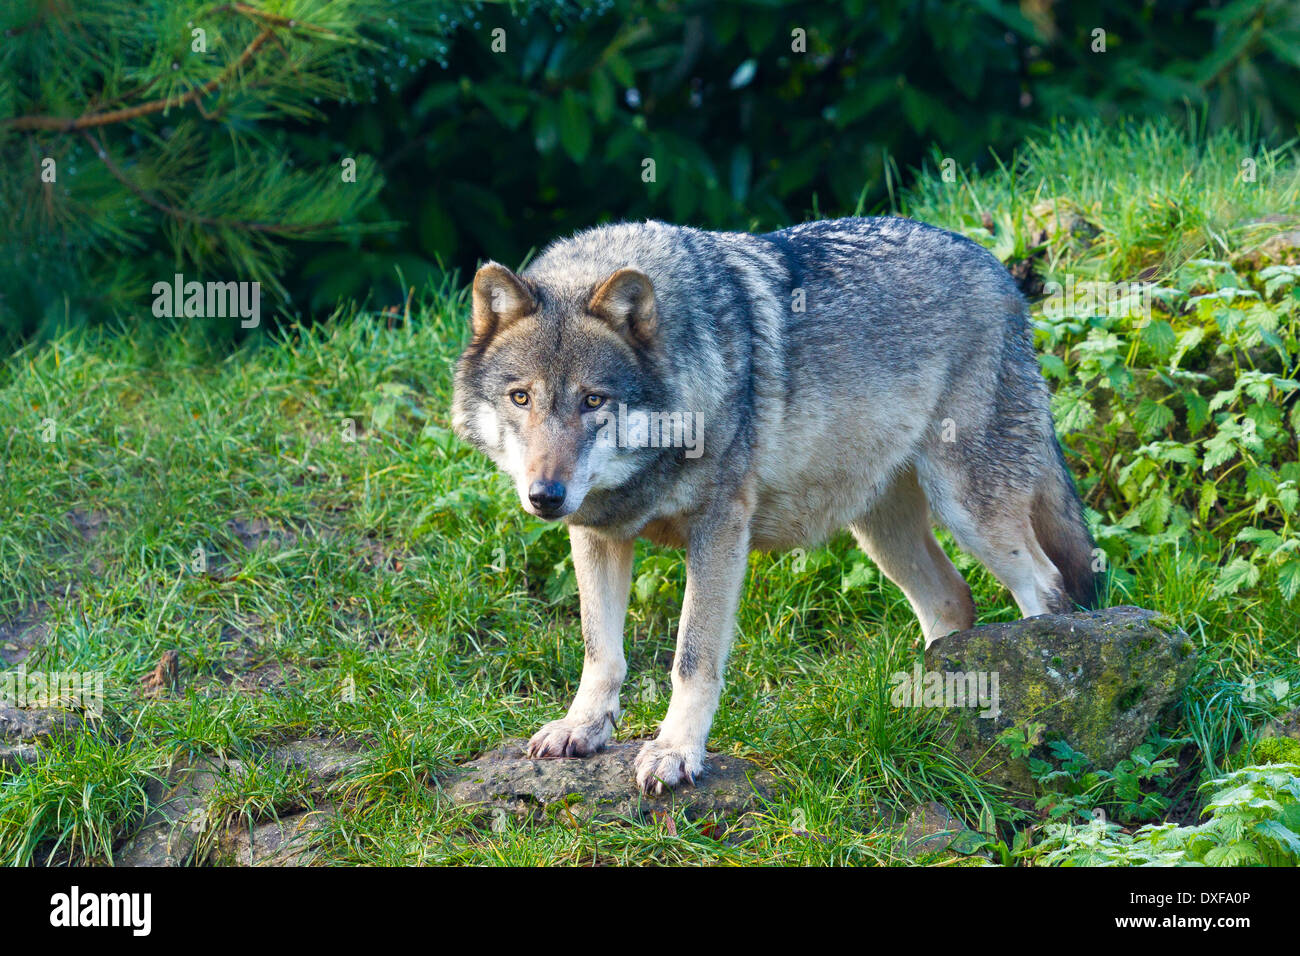 Canadian Timber Wolf, Alaskan Tundra Wolf or Mackenzie Valley Wolf (Canis lupus occidentalis) Standing Stock Photo